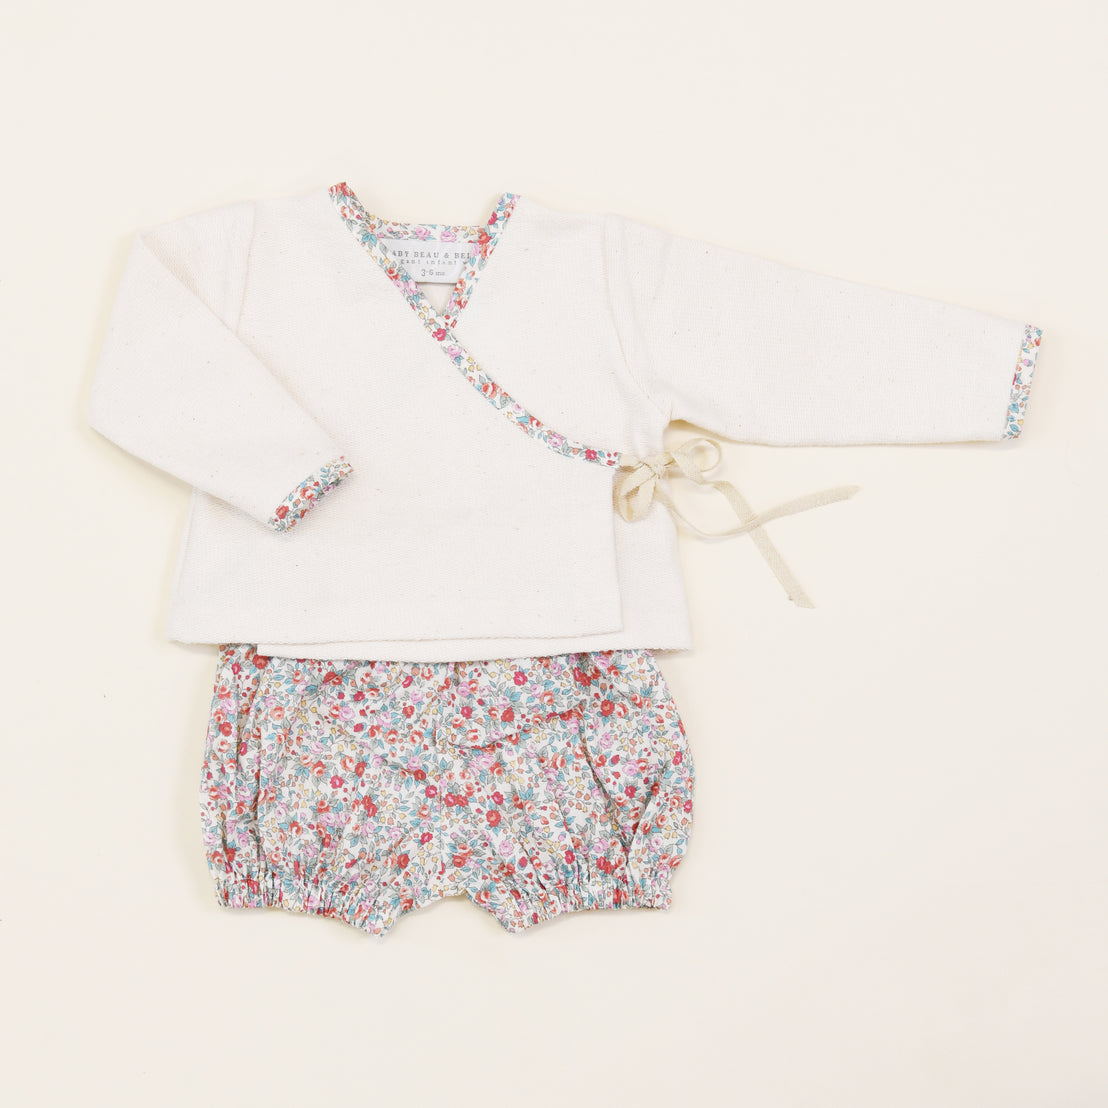 Petite Fleur Wrap Top & Bloomers baby heirloom kimono top with floral trim and matching floral shorts, laid flat on a light background.